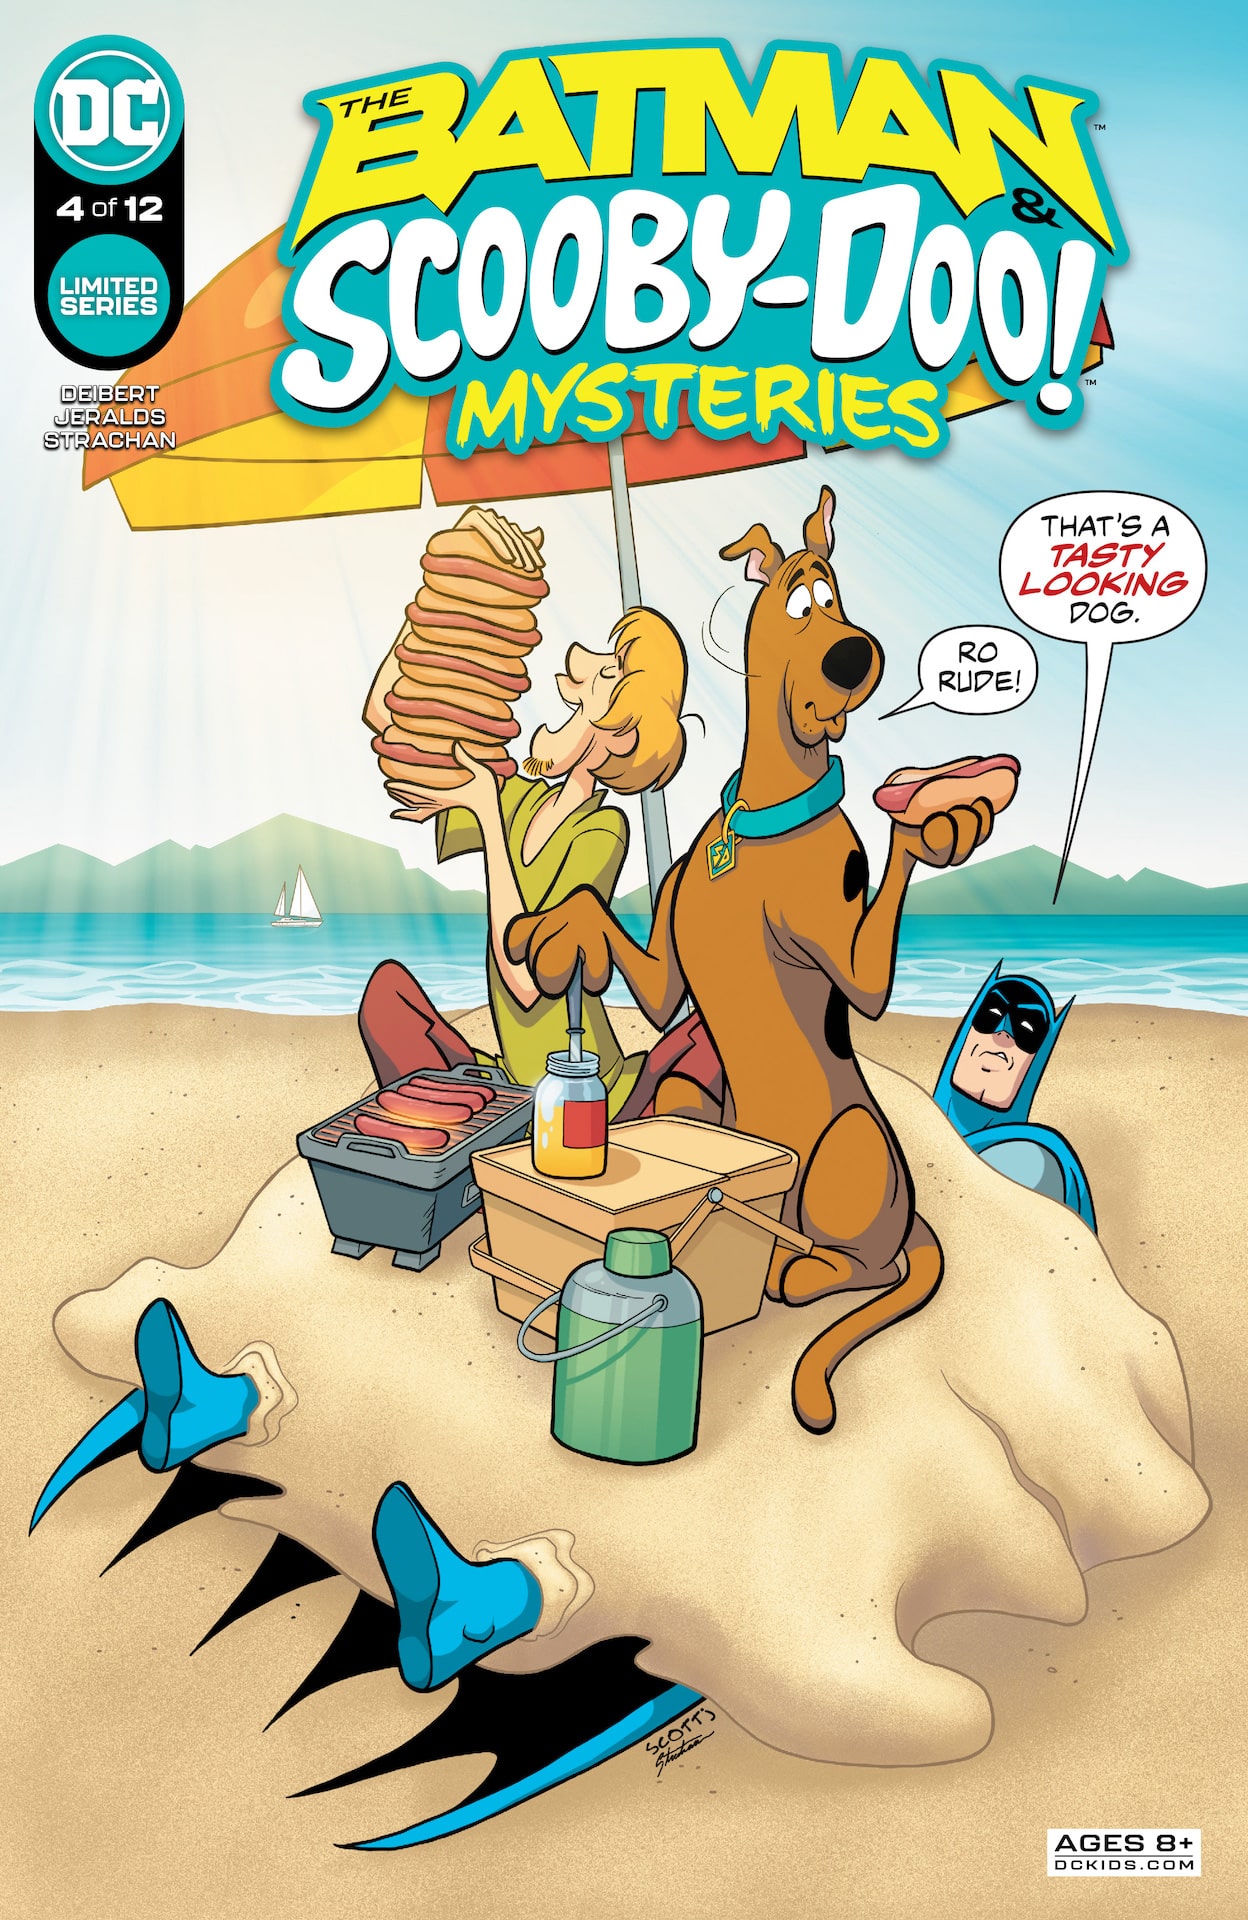 DC Preview: The Batman & Scooby-Doo Mysteries #4